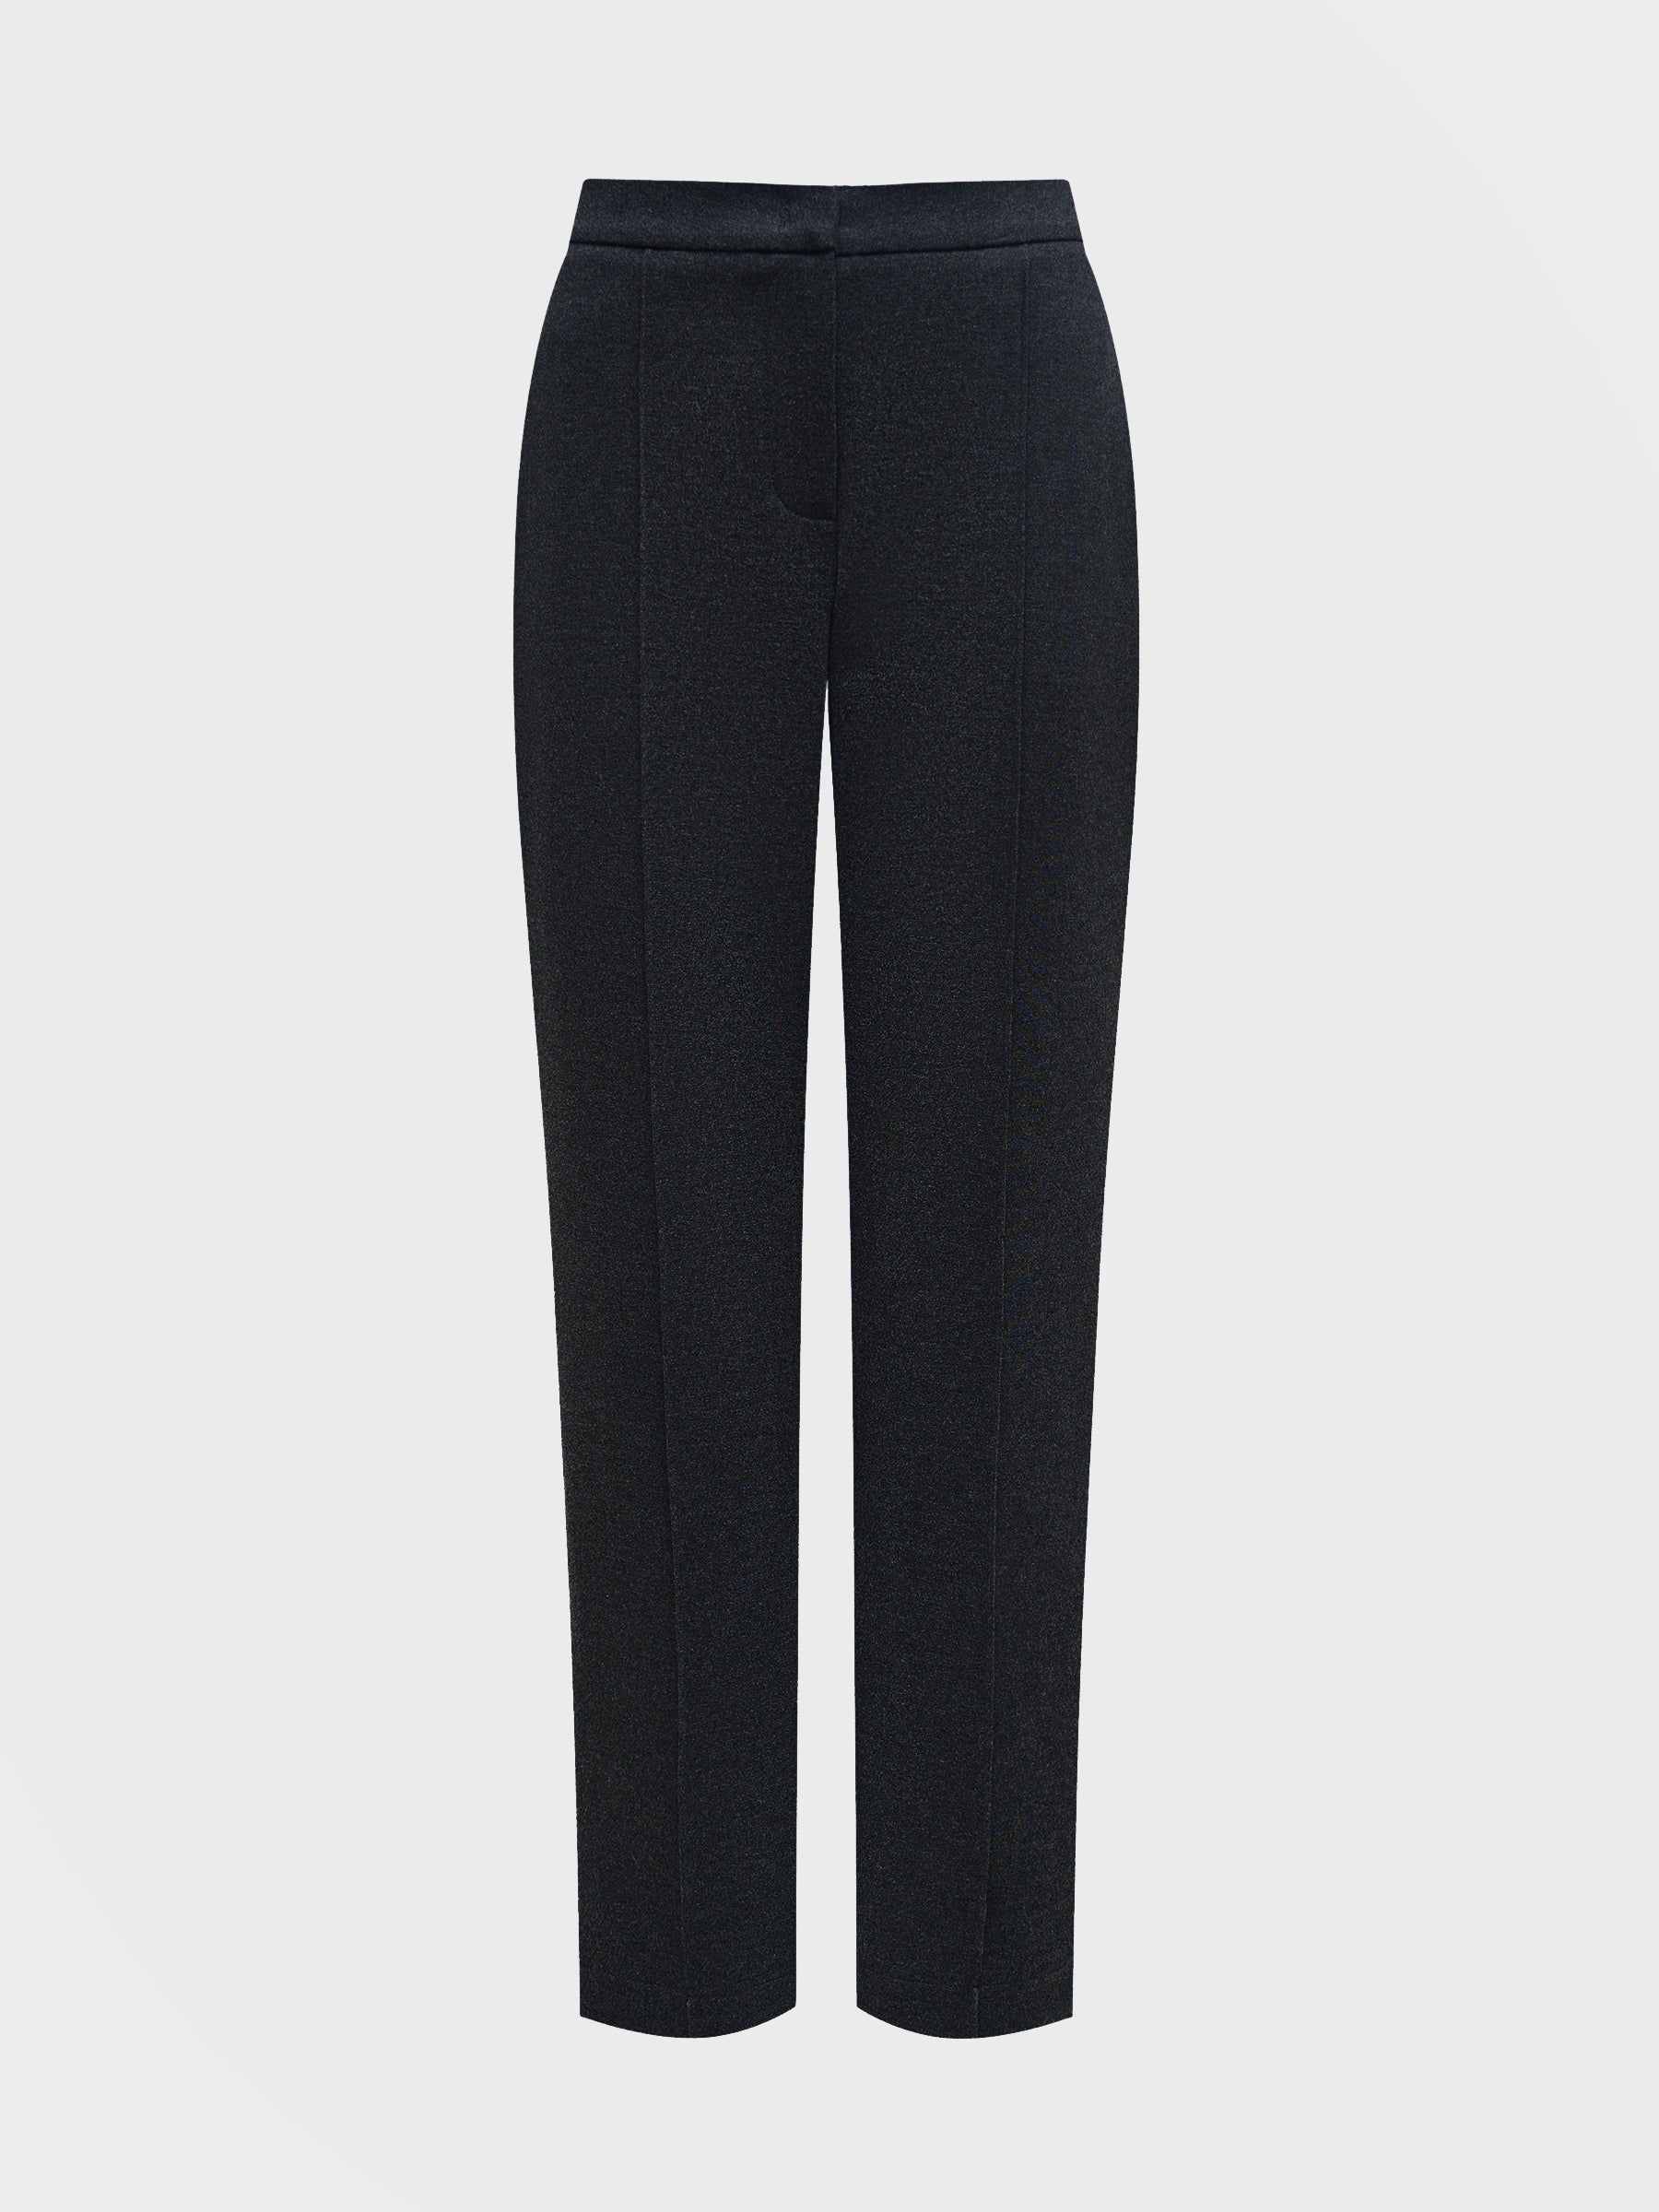 Slim fit jersey trousers